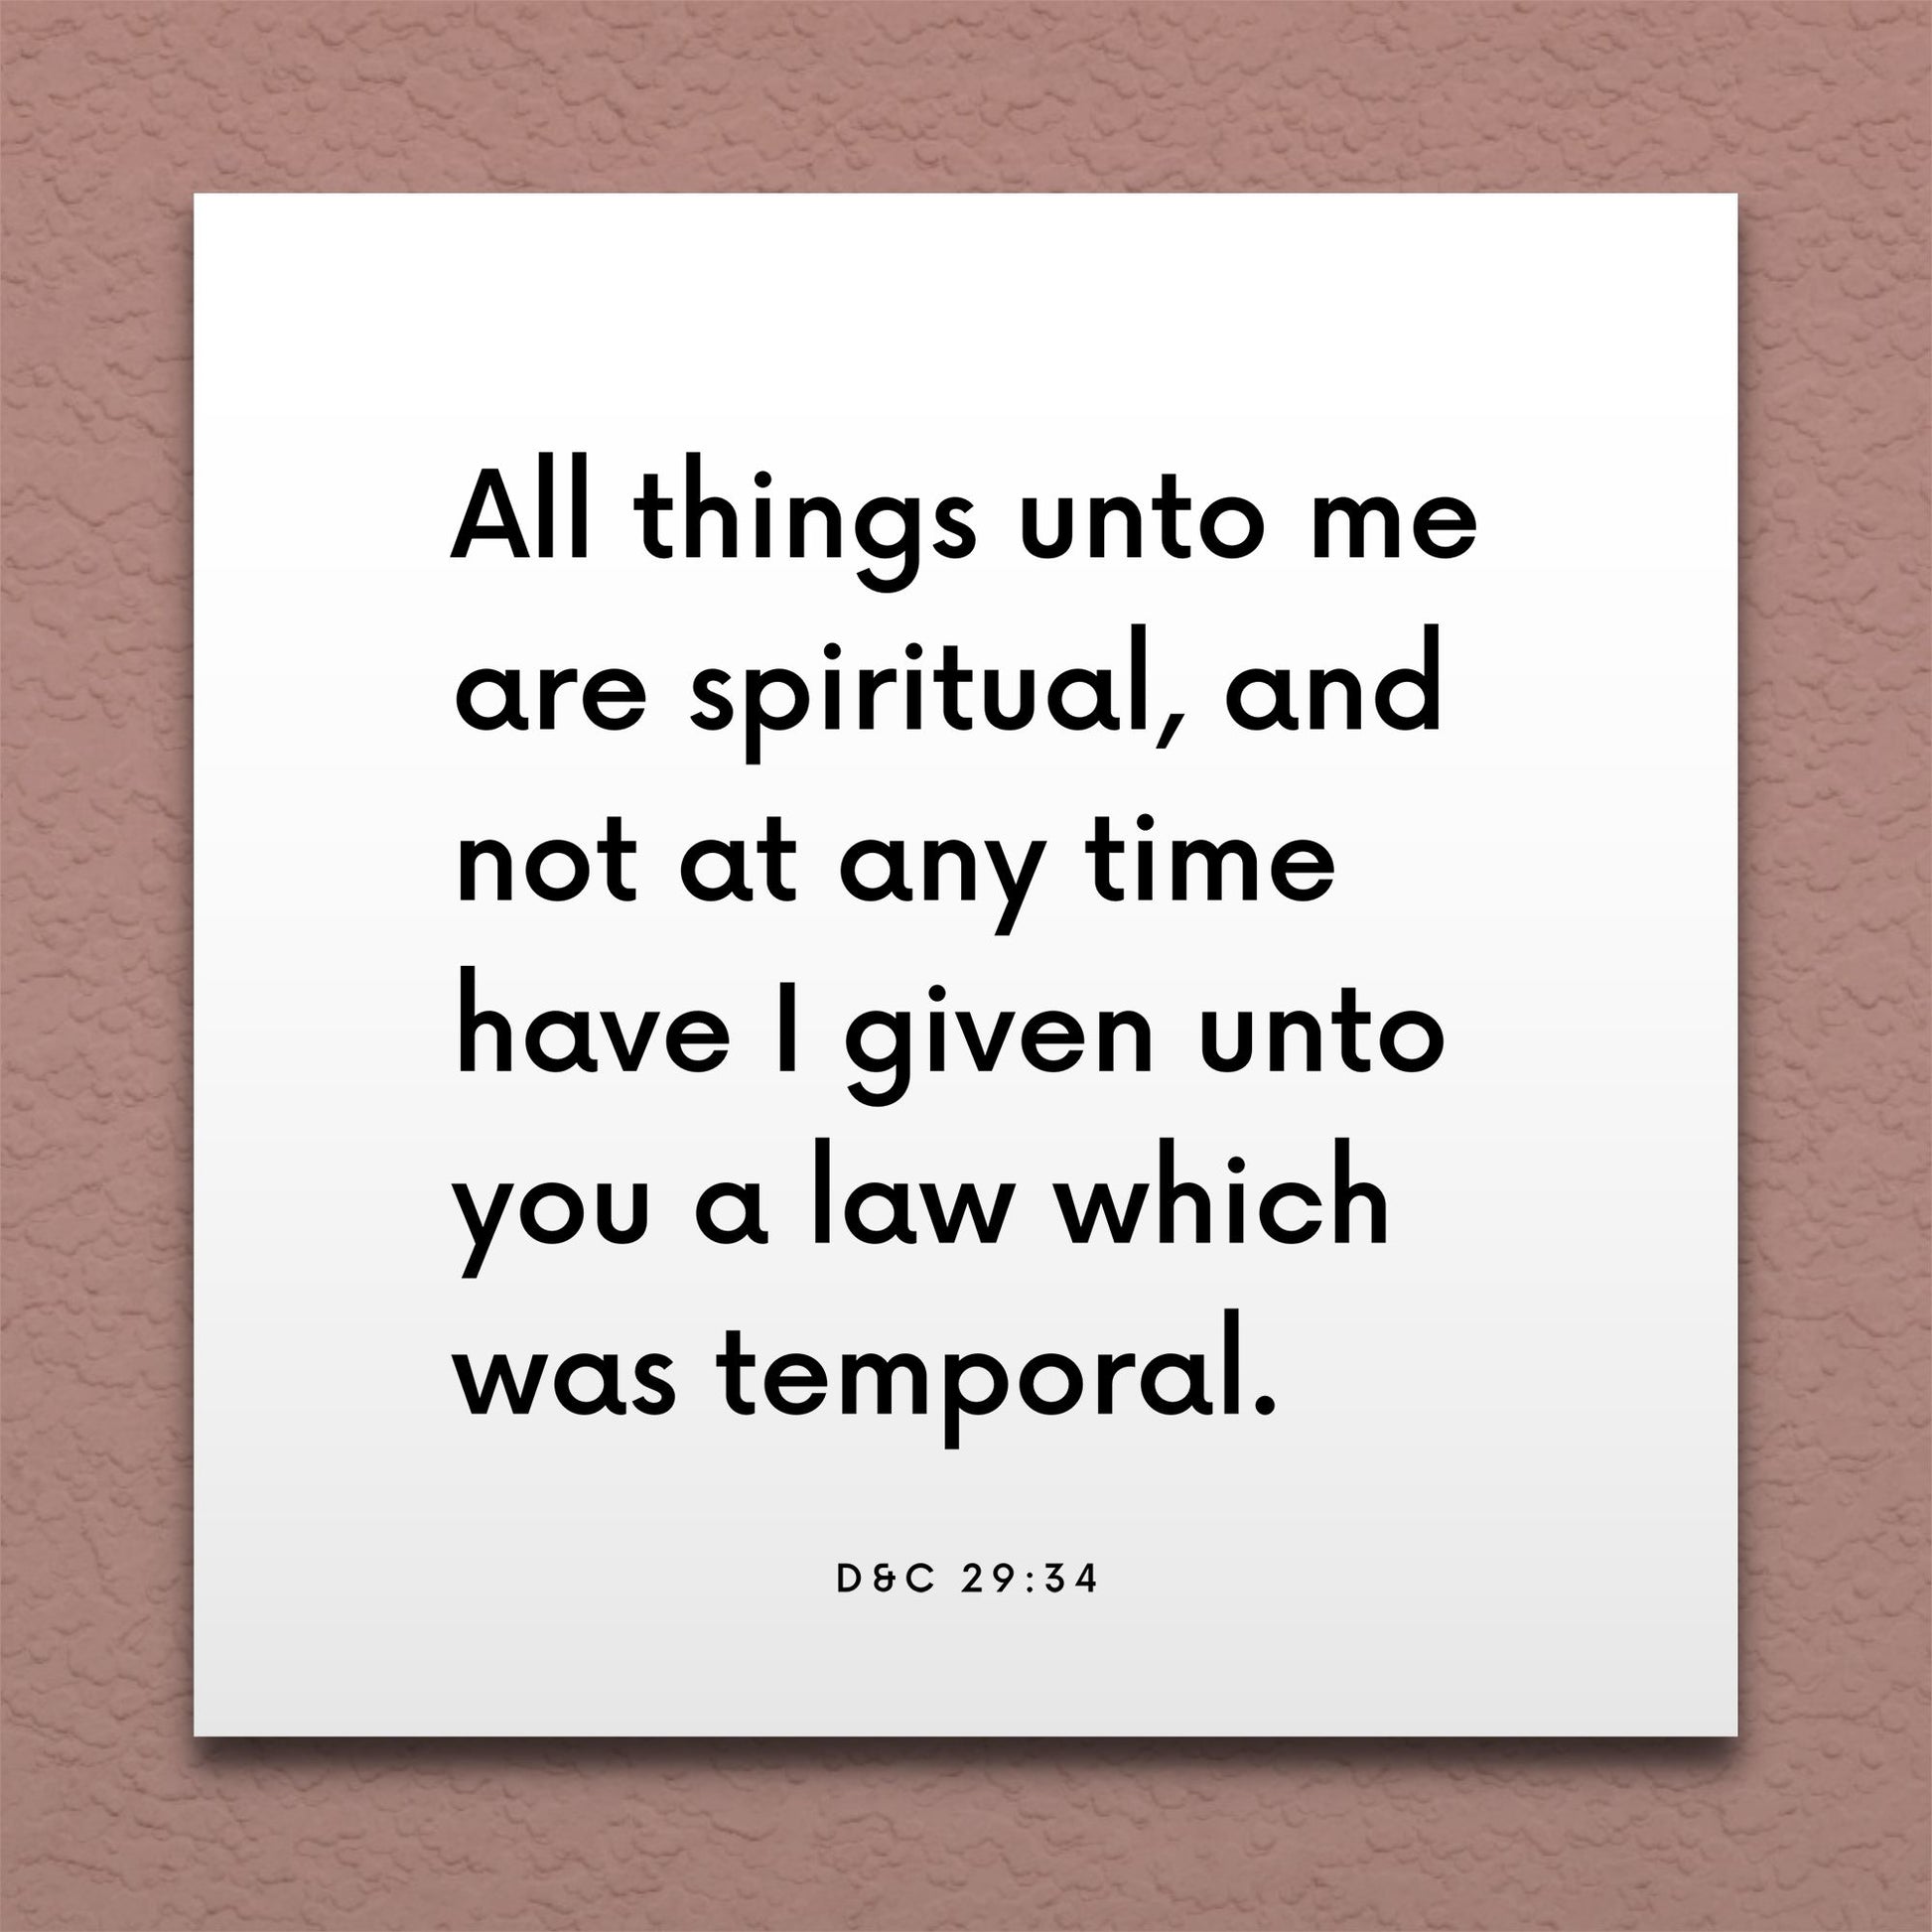 Wall-mounted scripture tile for D&C 29:34 - "All things unto me are spiritual"